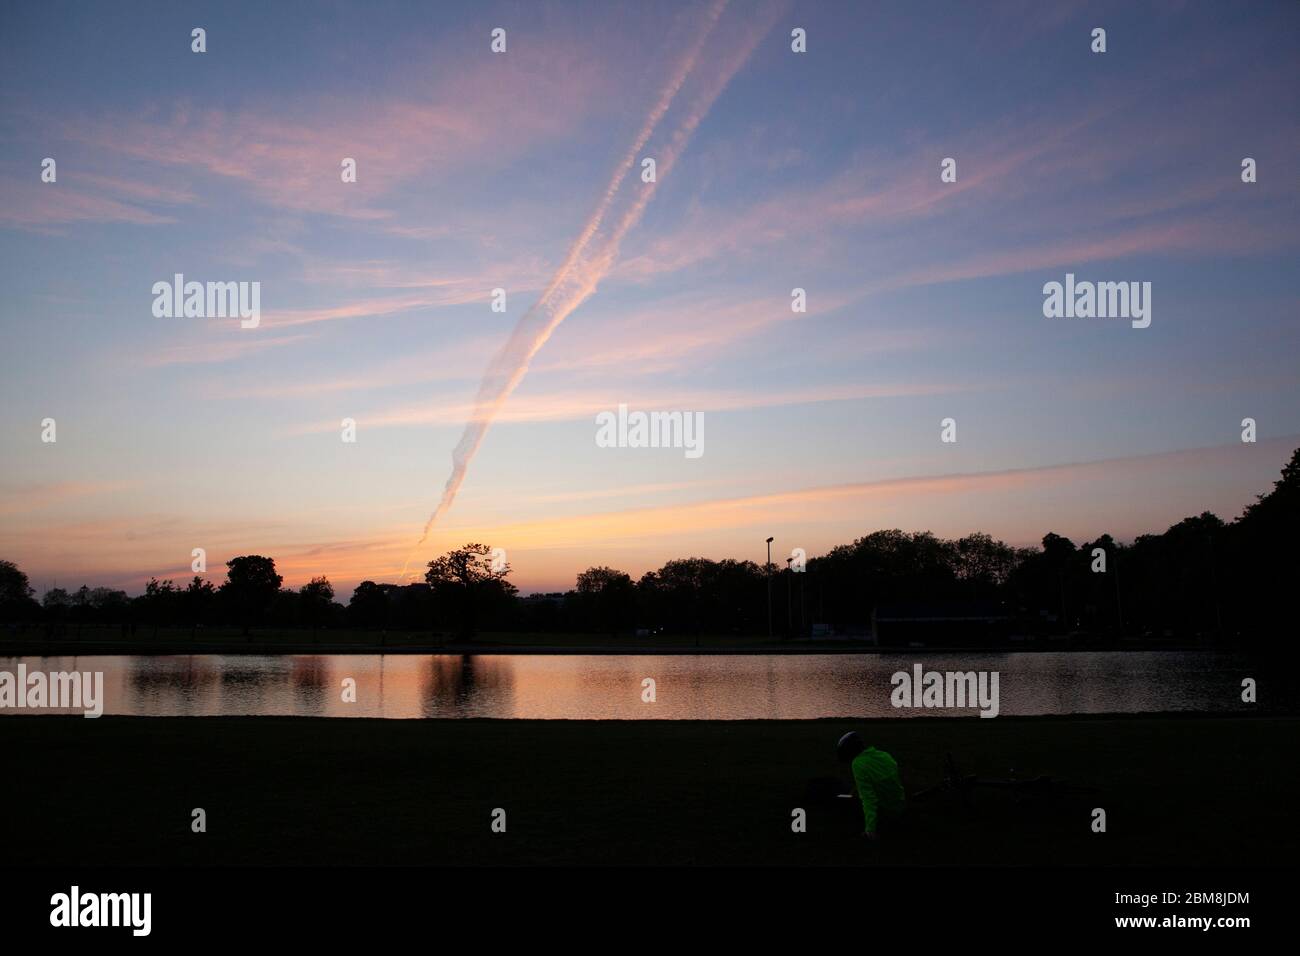 London, UK, 7 May 2020: After days of clear skies increasing number of flights are leaving vapour trails in the sky. On Clapham Common the resulting dramatic sunset was reflected in the Lond Pond. Anna Watson/Alamy Live News Stock Photo